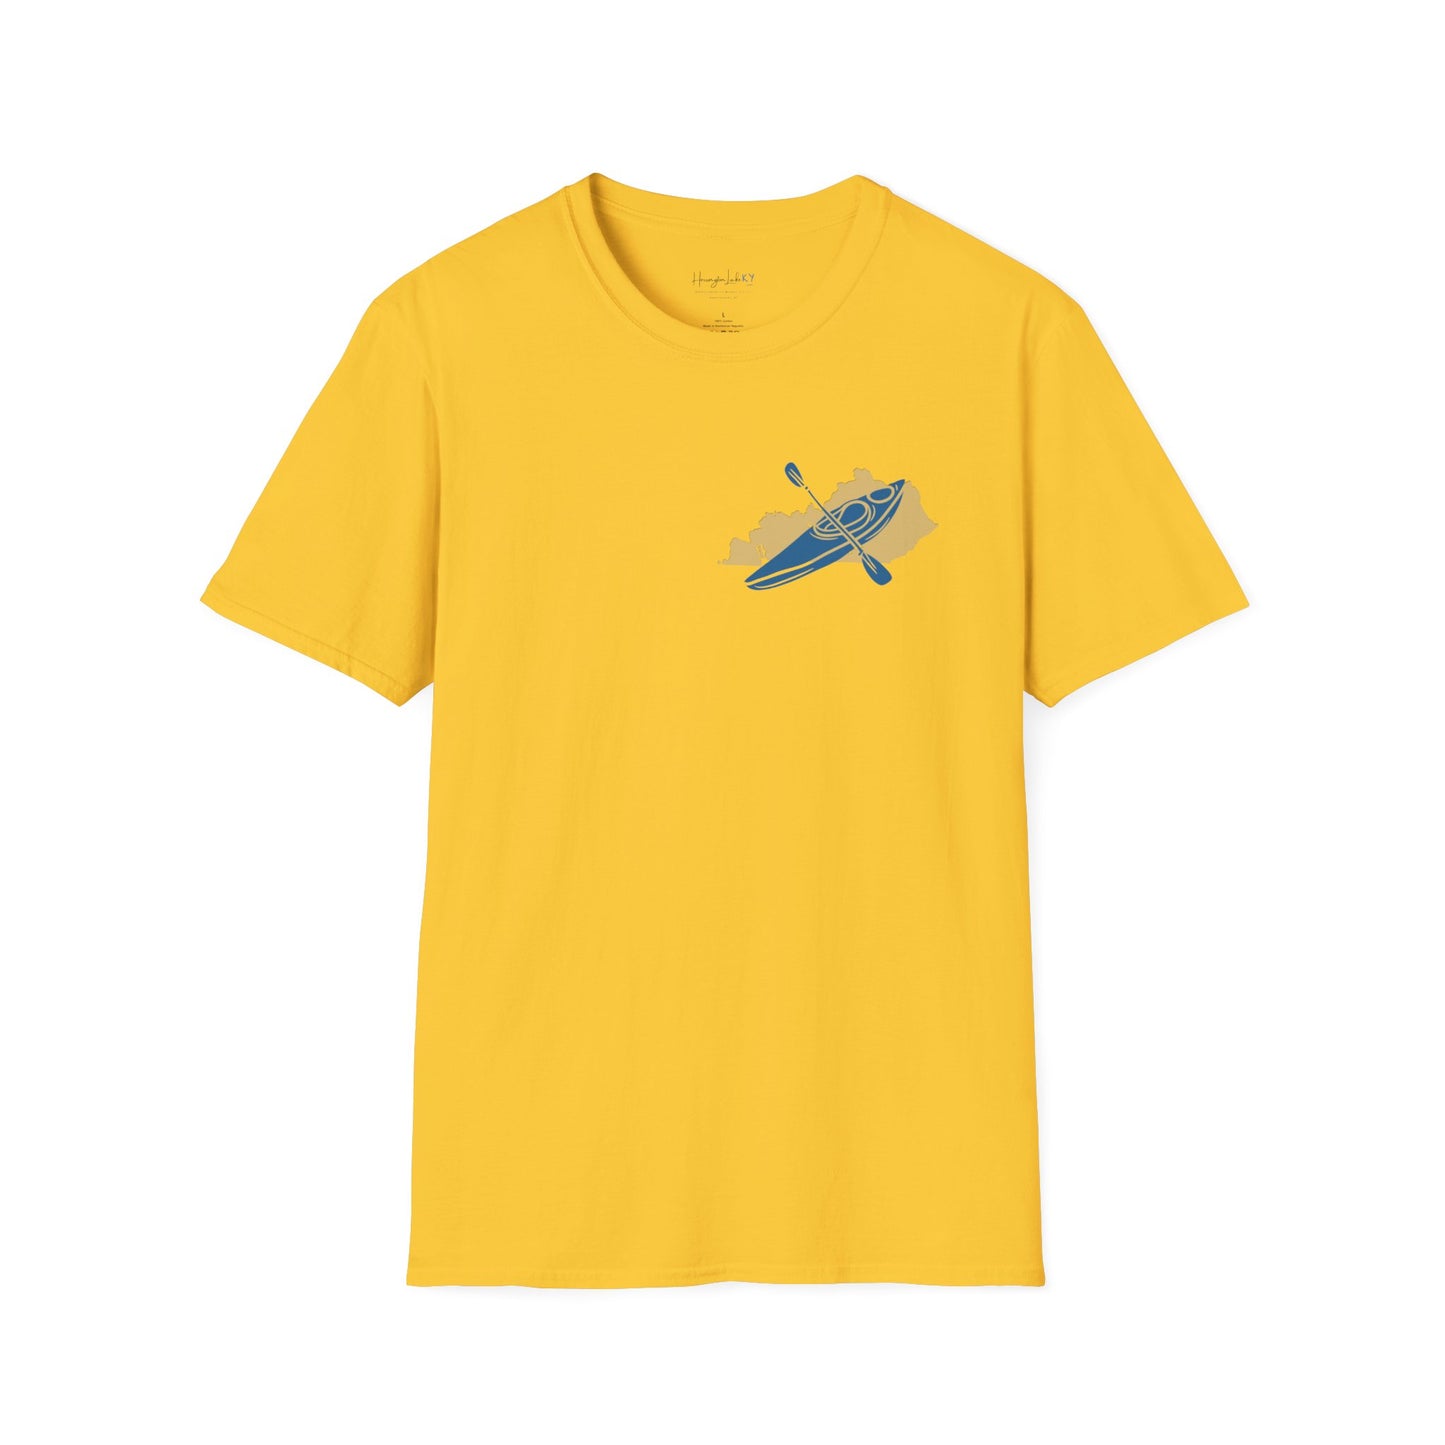 HLKY Kayak Club Soft Ringspun Cotton Double-Sided Tee